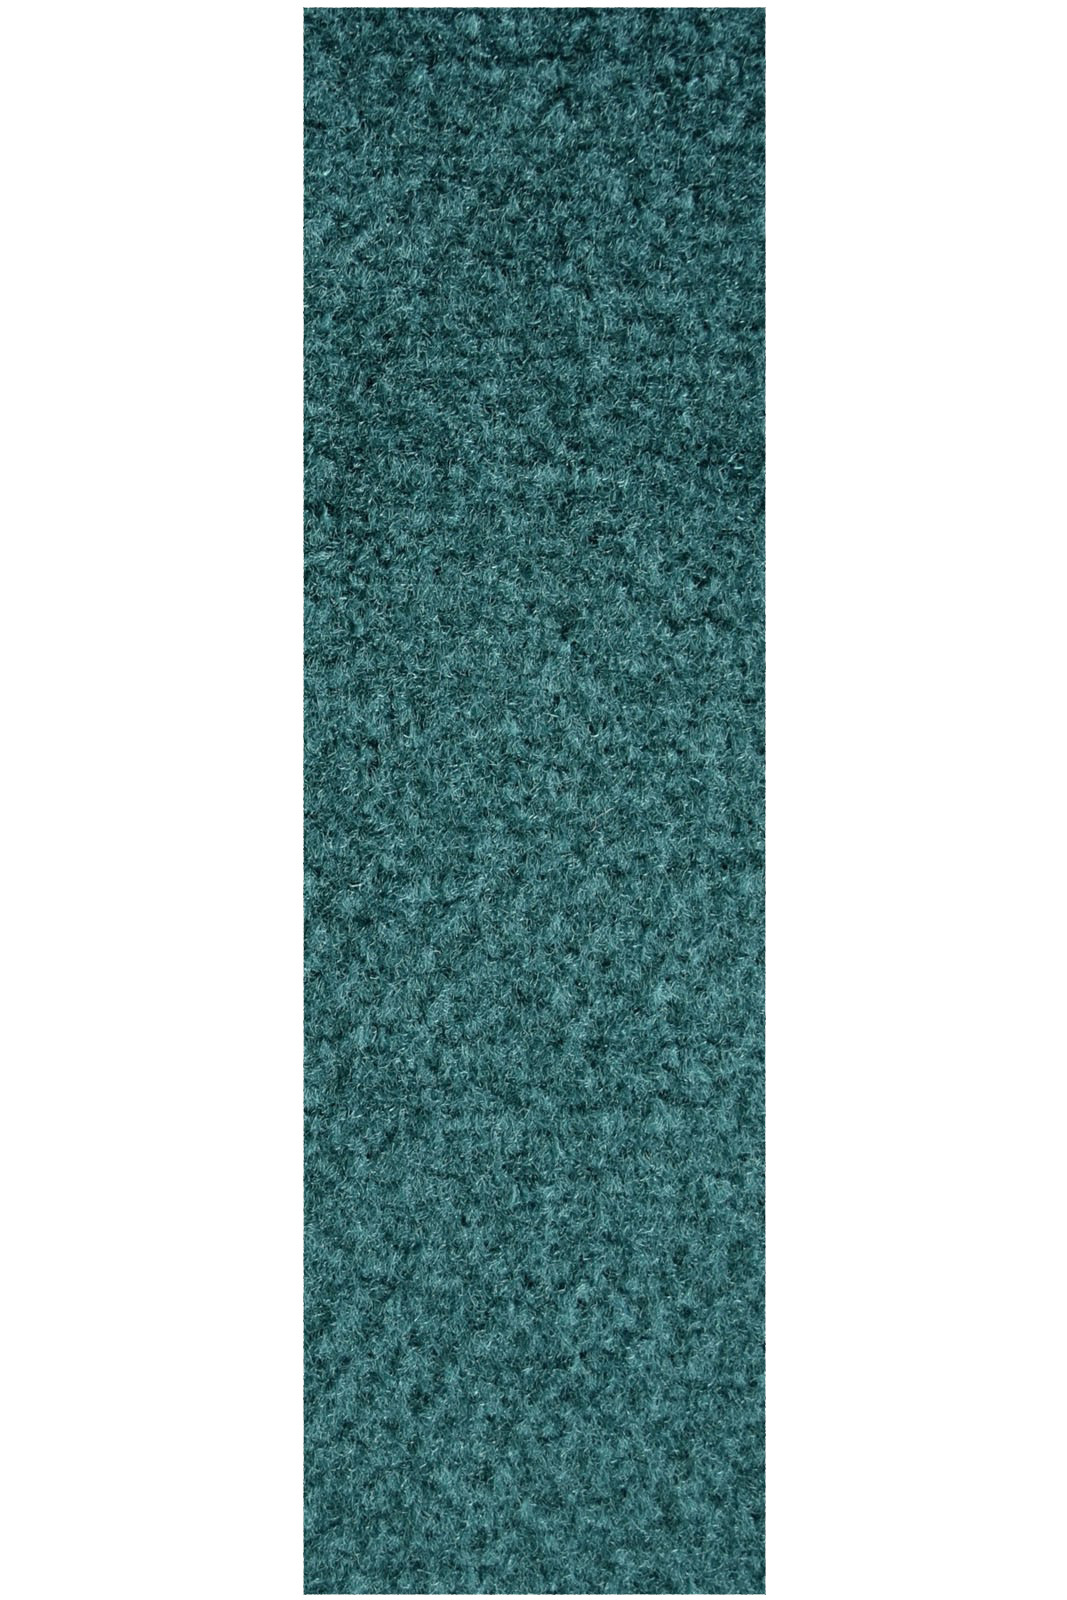 Commercial Indoor/Outdoor Teal Custom Size Runner 2'6" x18' - Area Rug with Rubber Marine Backing for Patio, Porch, Deck, Boat, Basement or Garage with Premium Bound Polyester Edges - image 1 of 1